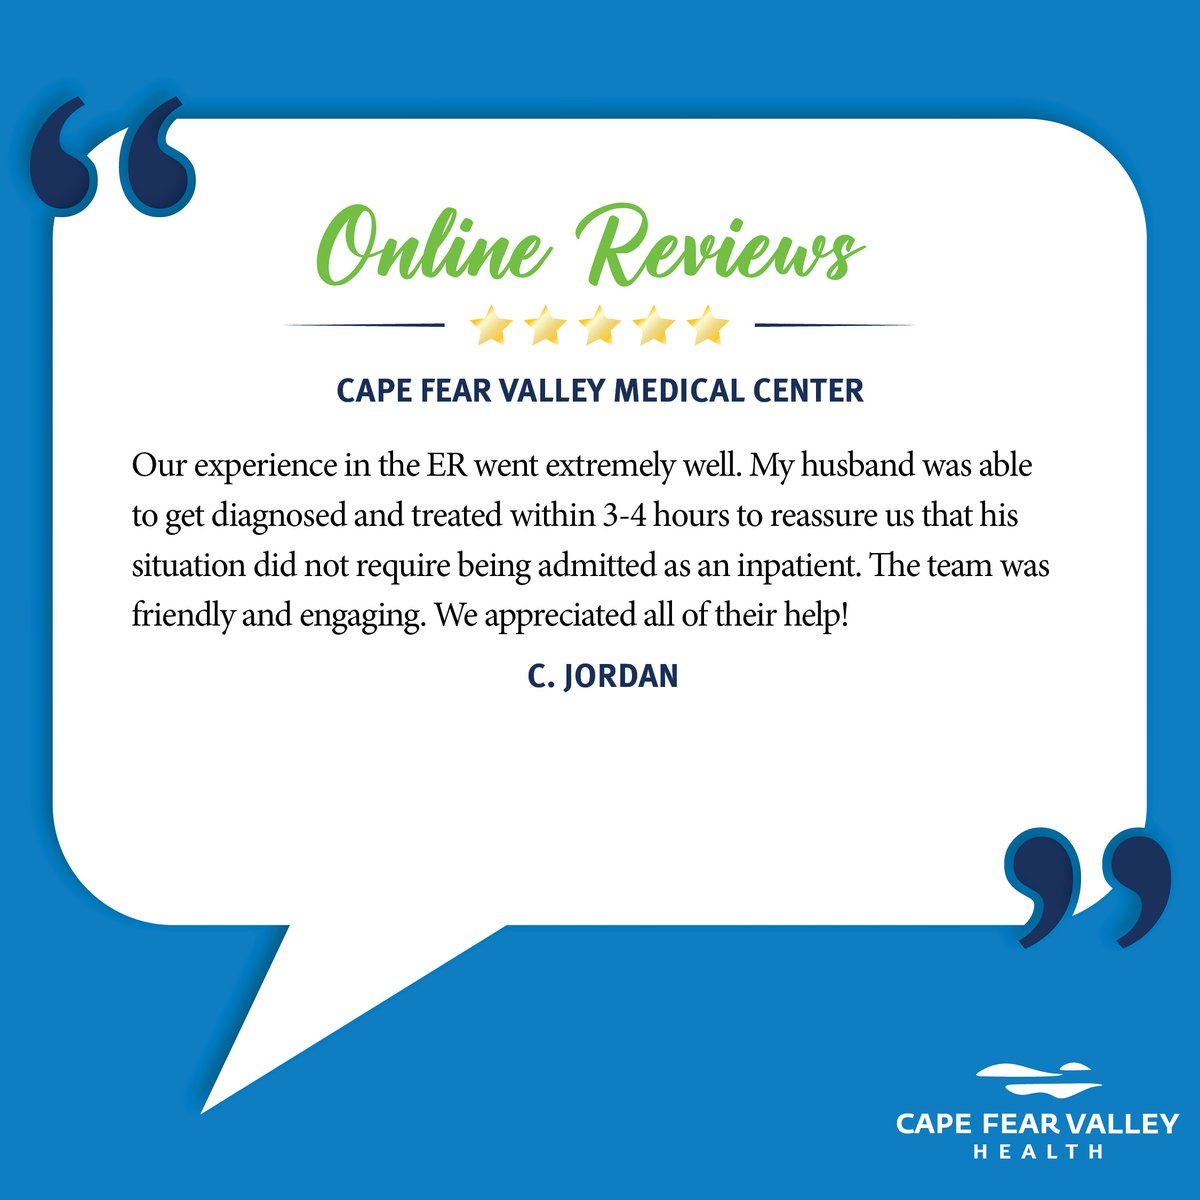 Thank you for the review, C! We appreciate you choosing our care team; we hope your husband is feeling well now! If you've had a great experience at any Cape Fear Valley Health or Harnett Health facility, we'd like to hear about it. Inbox us to share your story today!